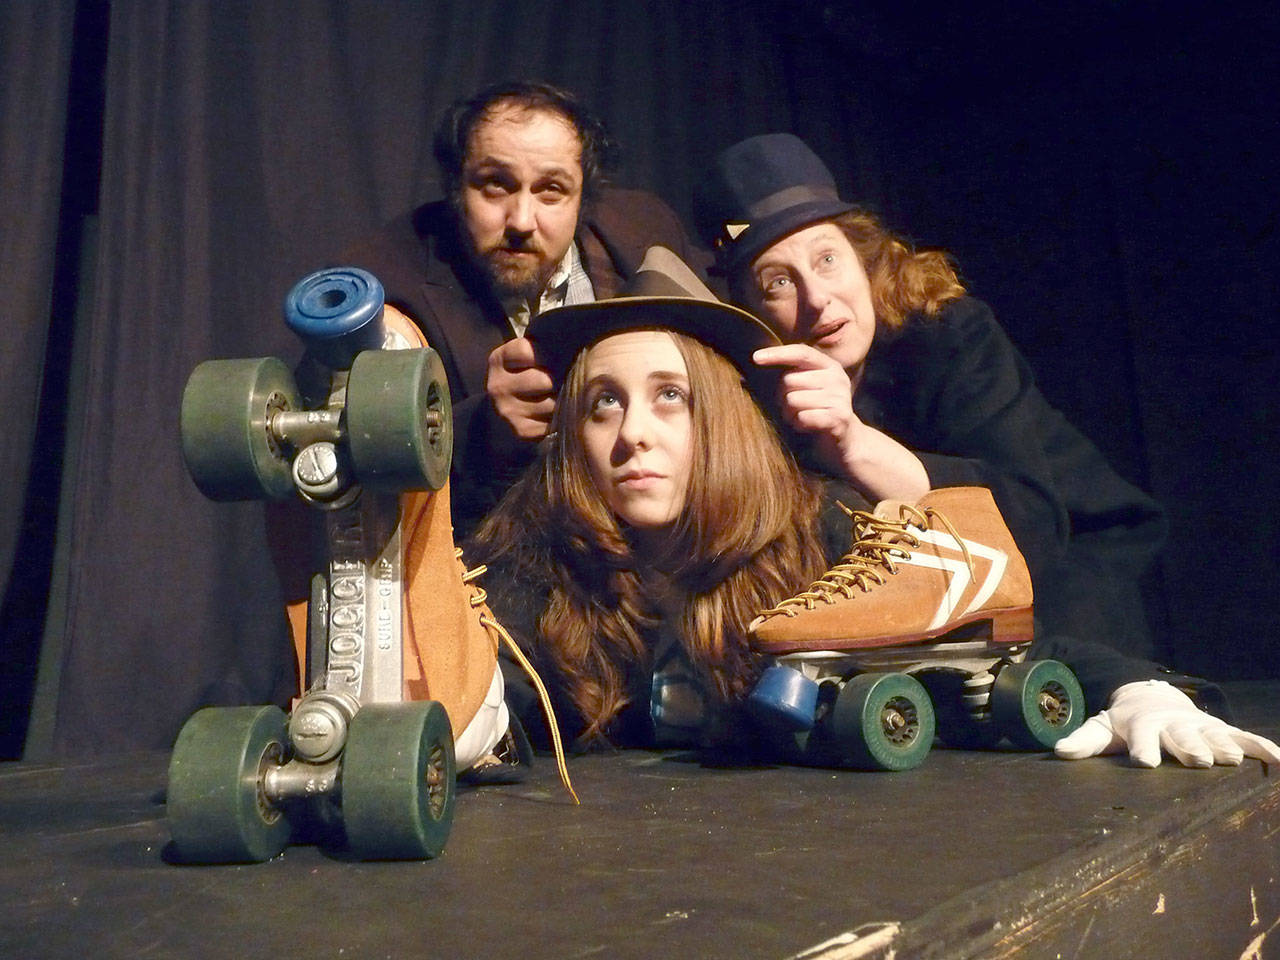 “And I, Pluto’s Only Cactus” is among the many offbeat plays staged at the Chameleon Theater. Appearing in the 2012 production were, from left, Jeremiah Morgan, Rosa Davies and Michelle Hensel. (photo courtesy The Chameleon Theater)